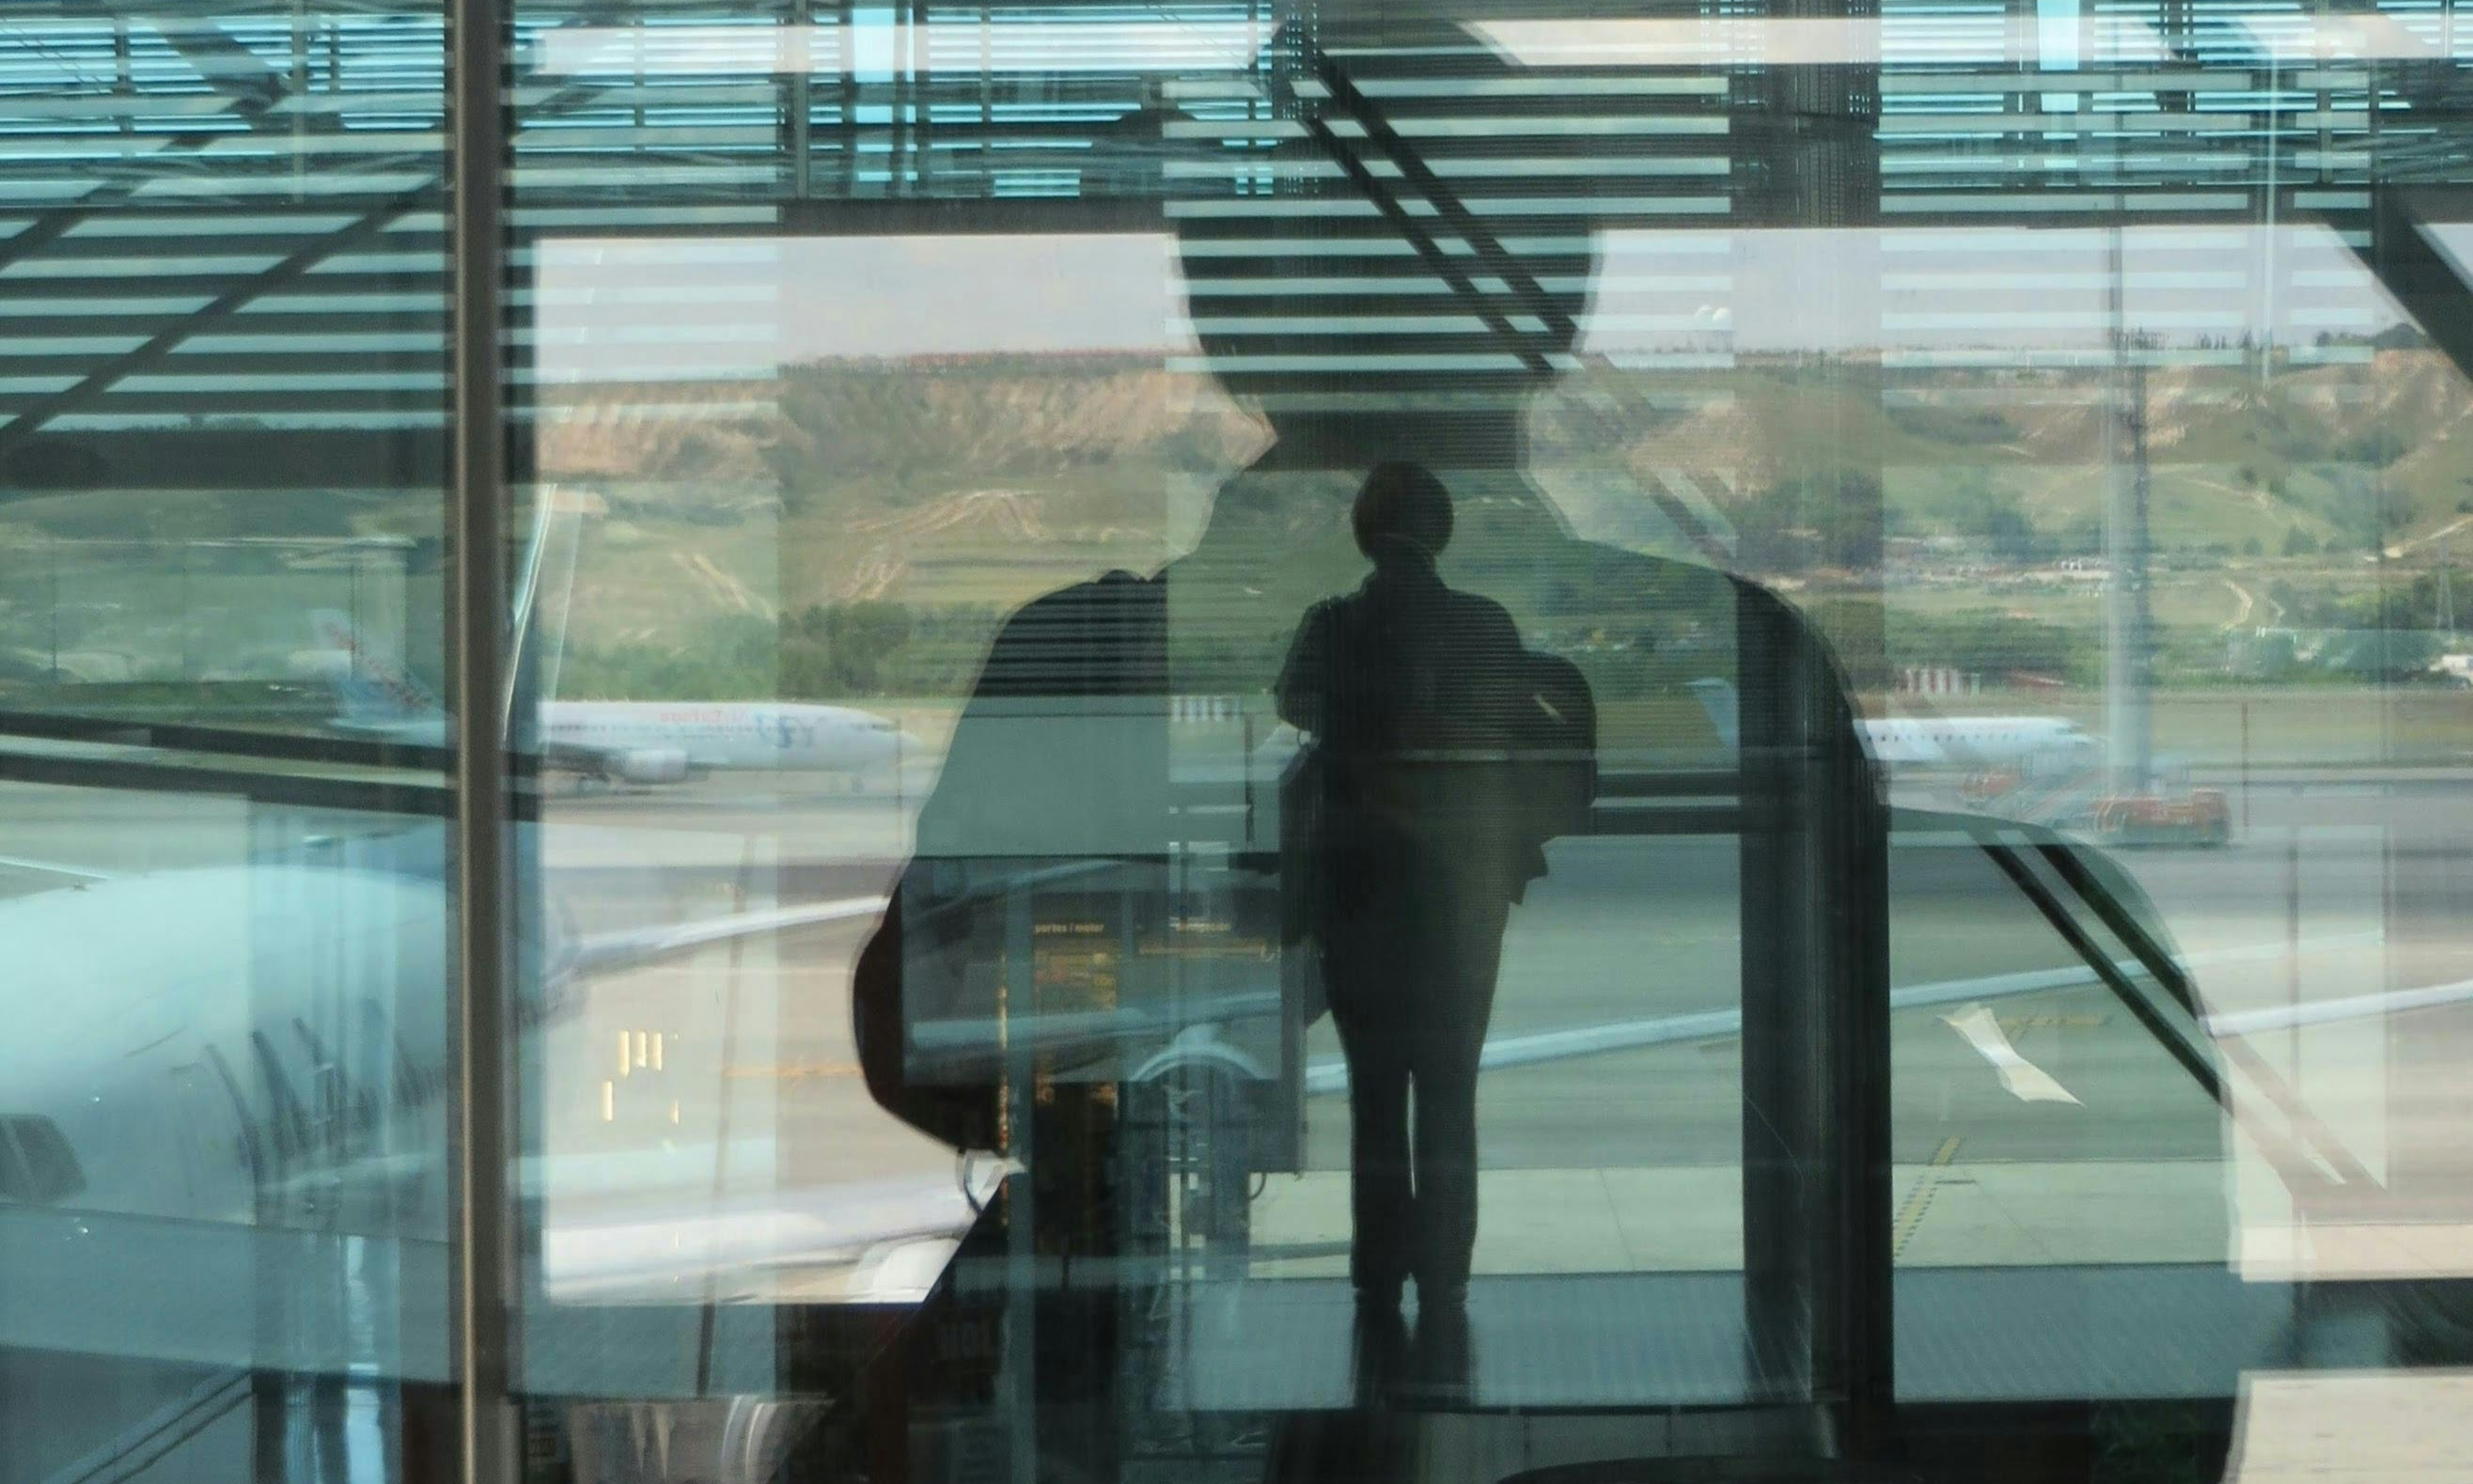 Sarah's reflection in window glass as she waits at the airport | Source: Pexels